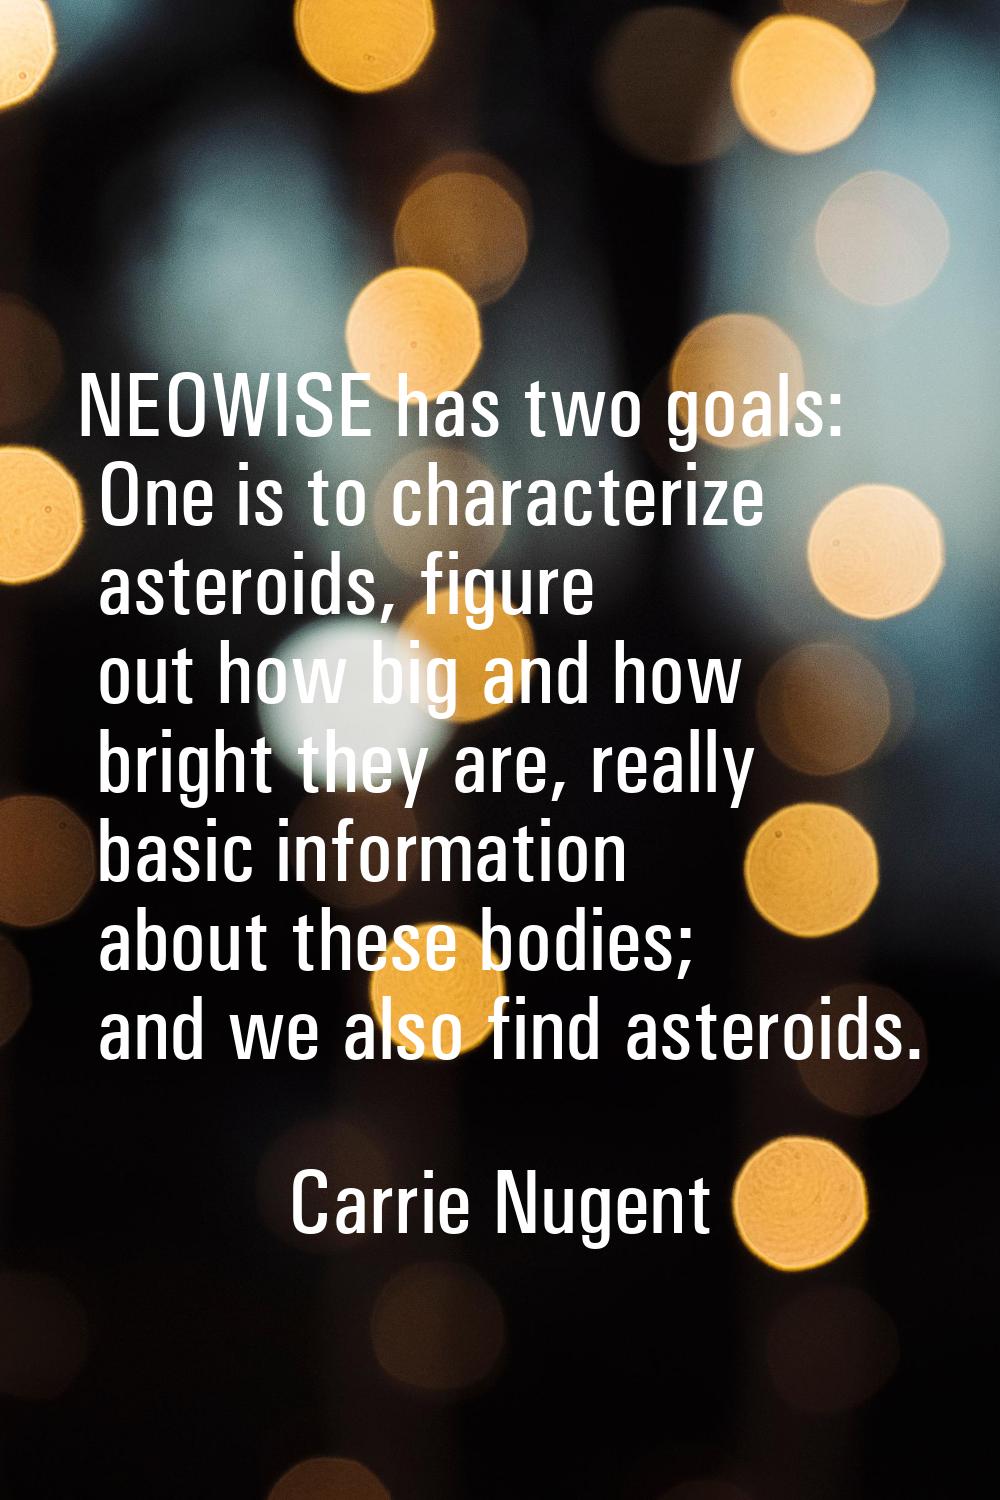 NEOWISE has two goals: One is to characterize asteroids, figure out how big and how bright they are